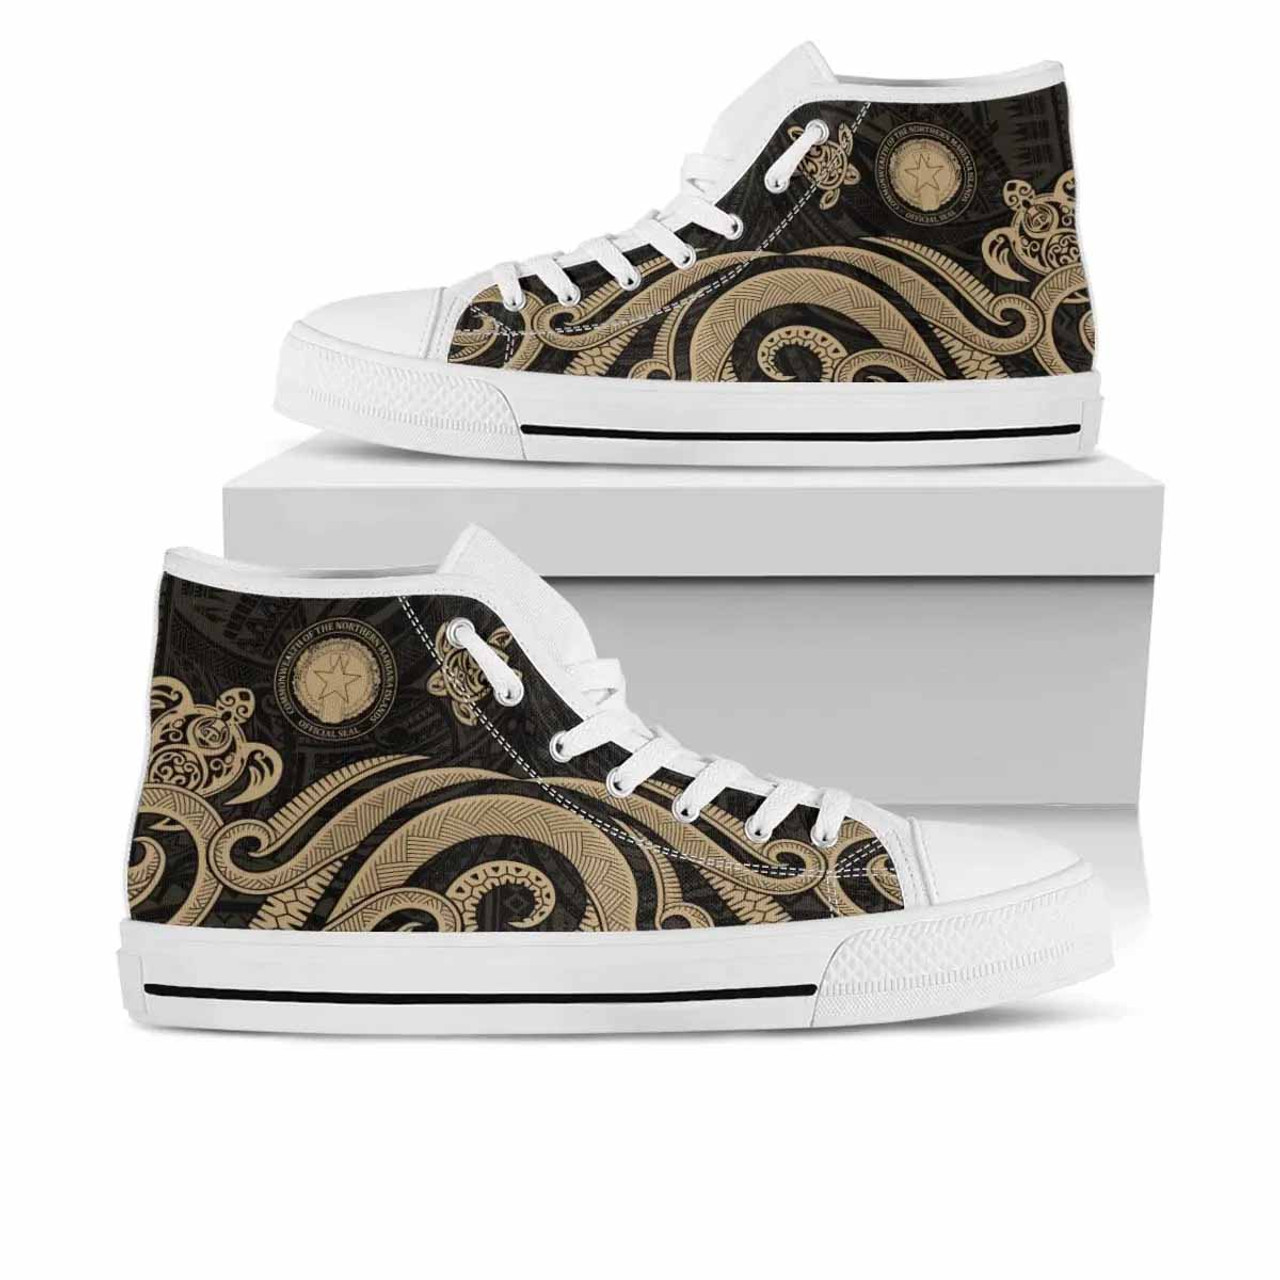 Northern Mariana Islands High Top Shoes - Gold Tentacle Turtle 7